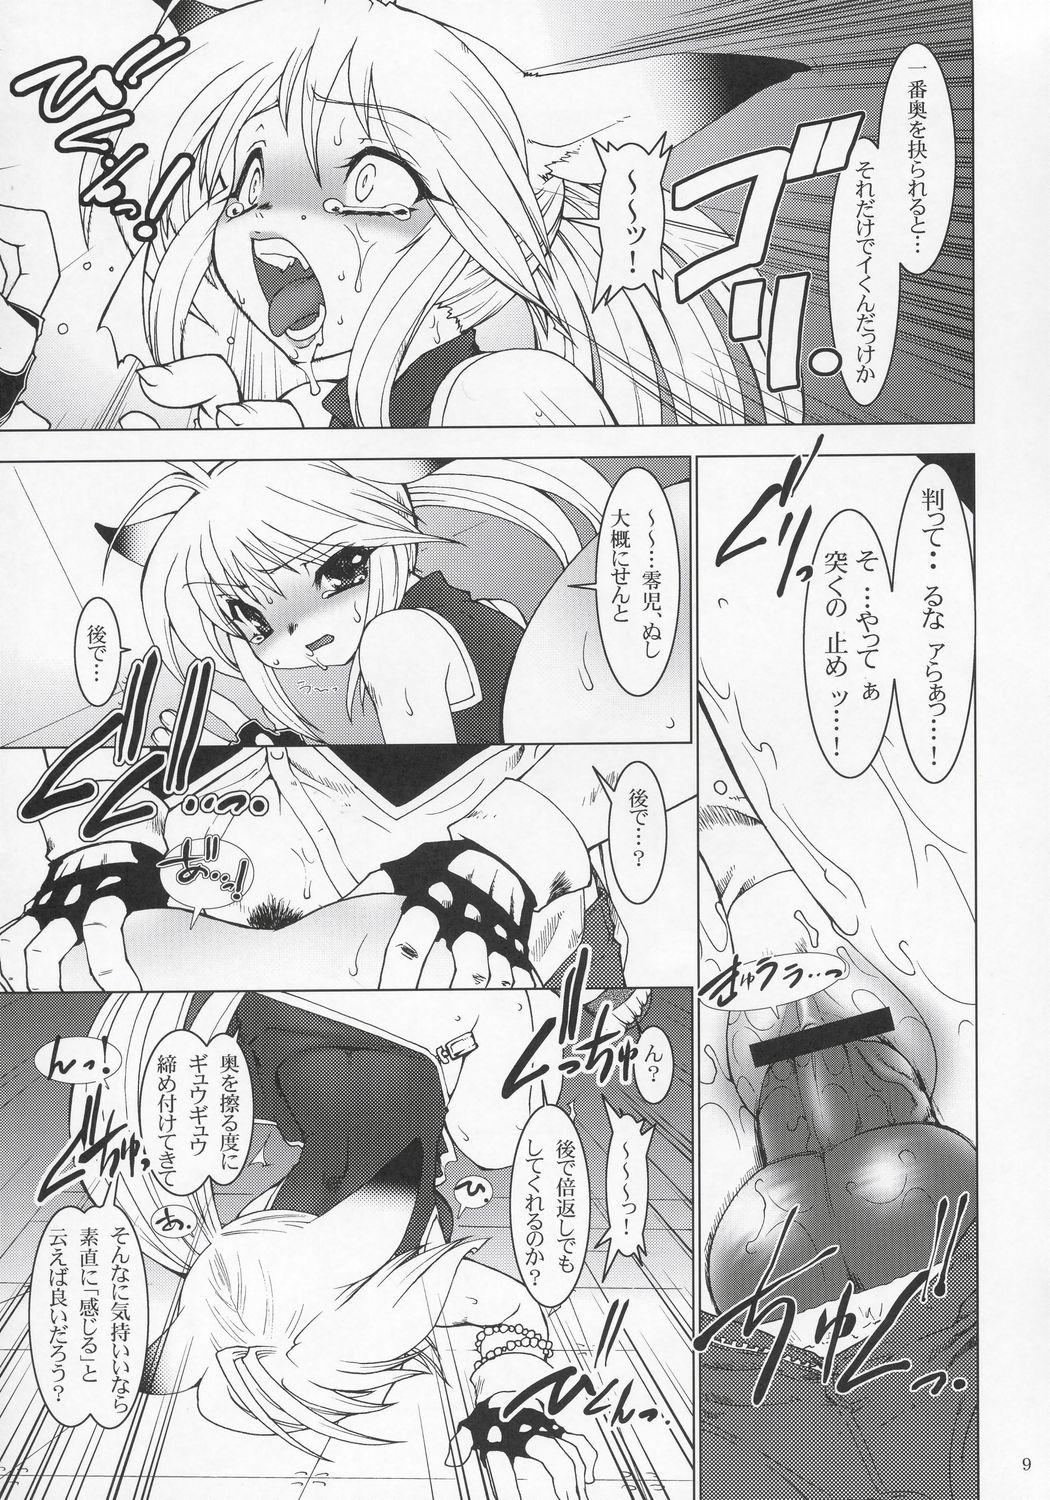 Throatfuck NxC - Endless frontier Valkyrie no bouken Titty Fuck - Page 8